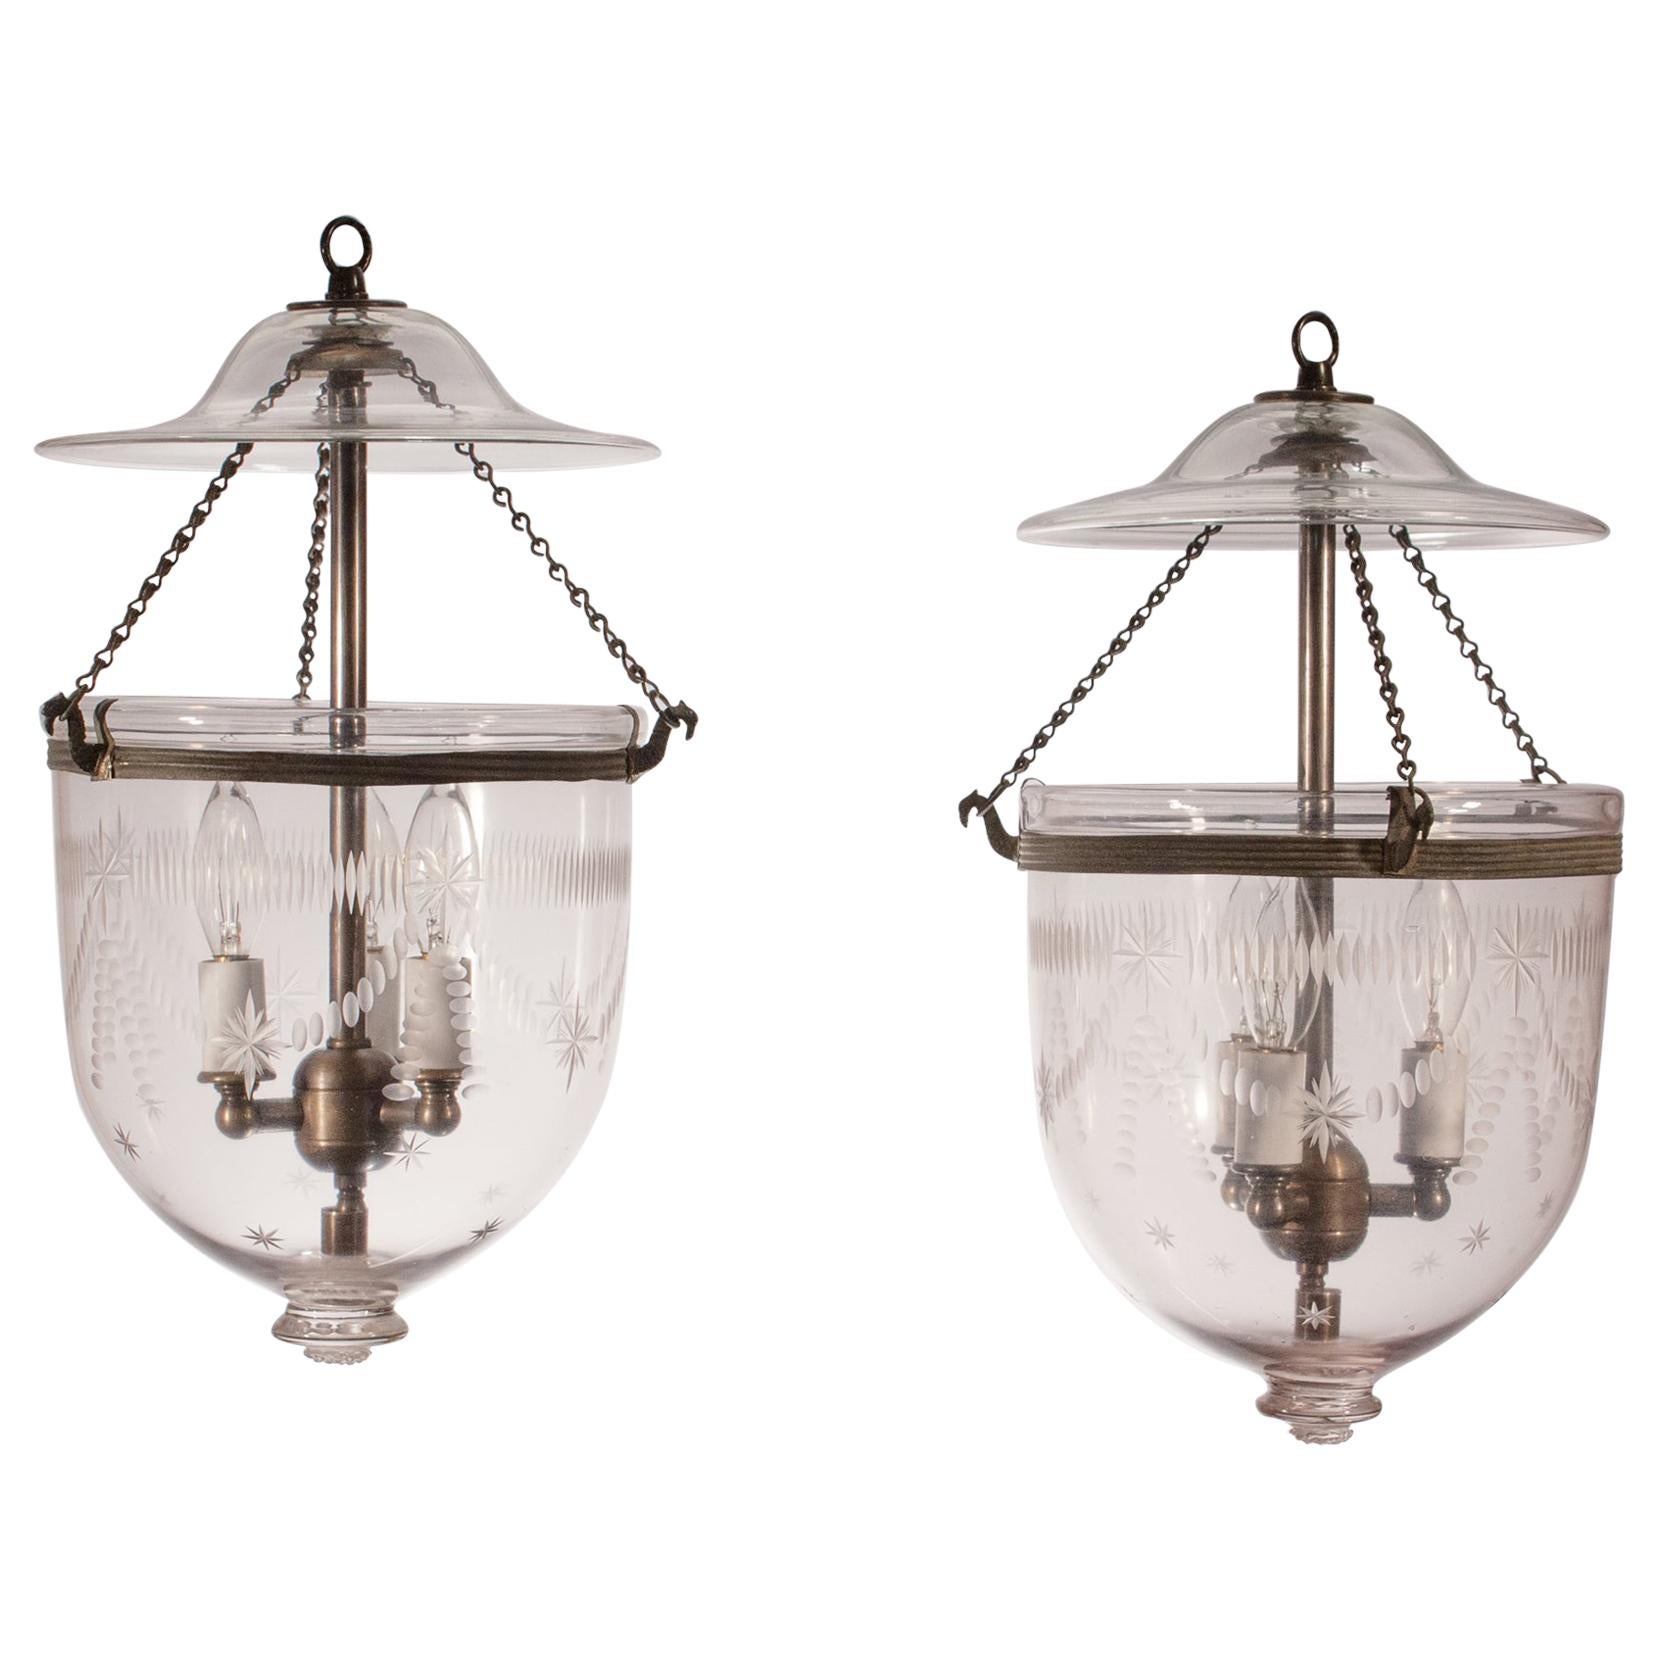 Pair of Petite Antique Bell Jar Lanterns with Federal Etching